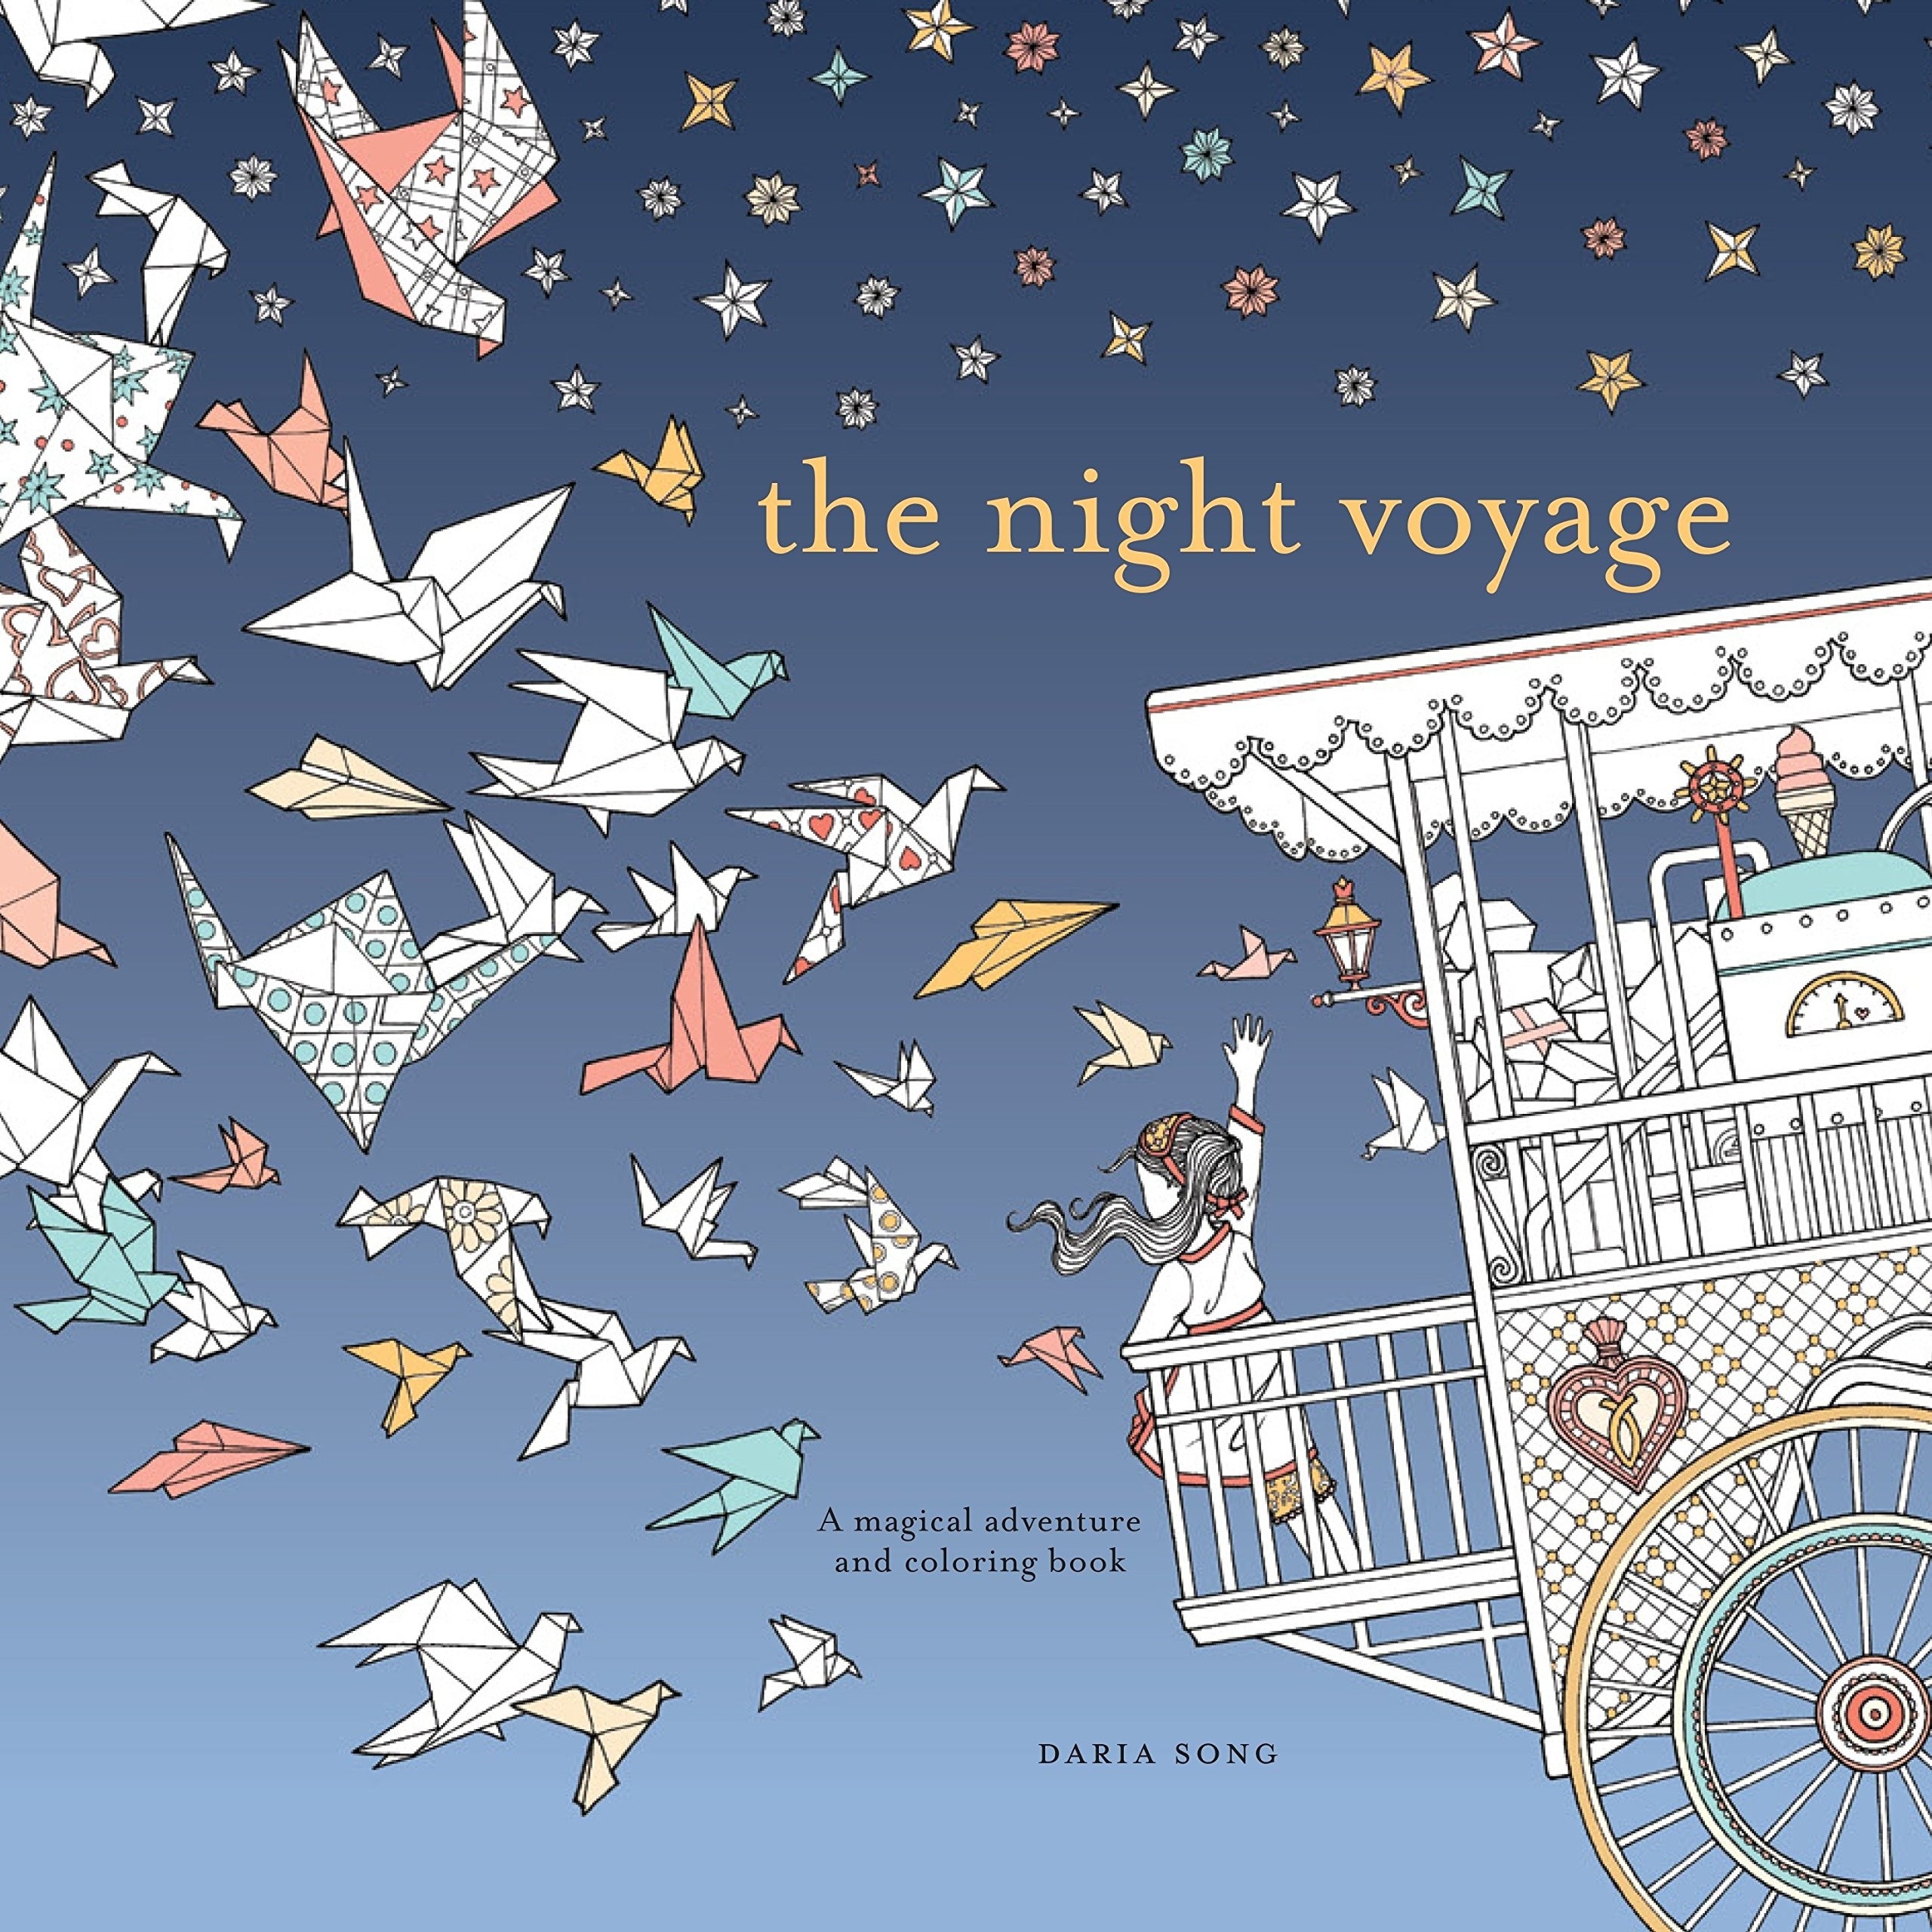 Cover of the Night Voyage book